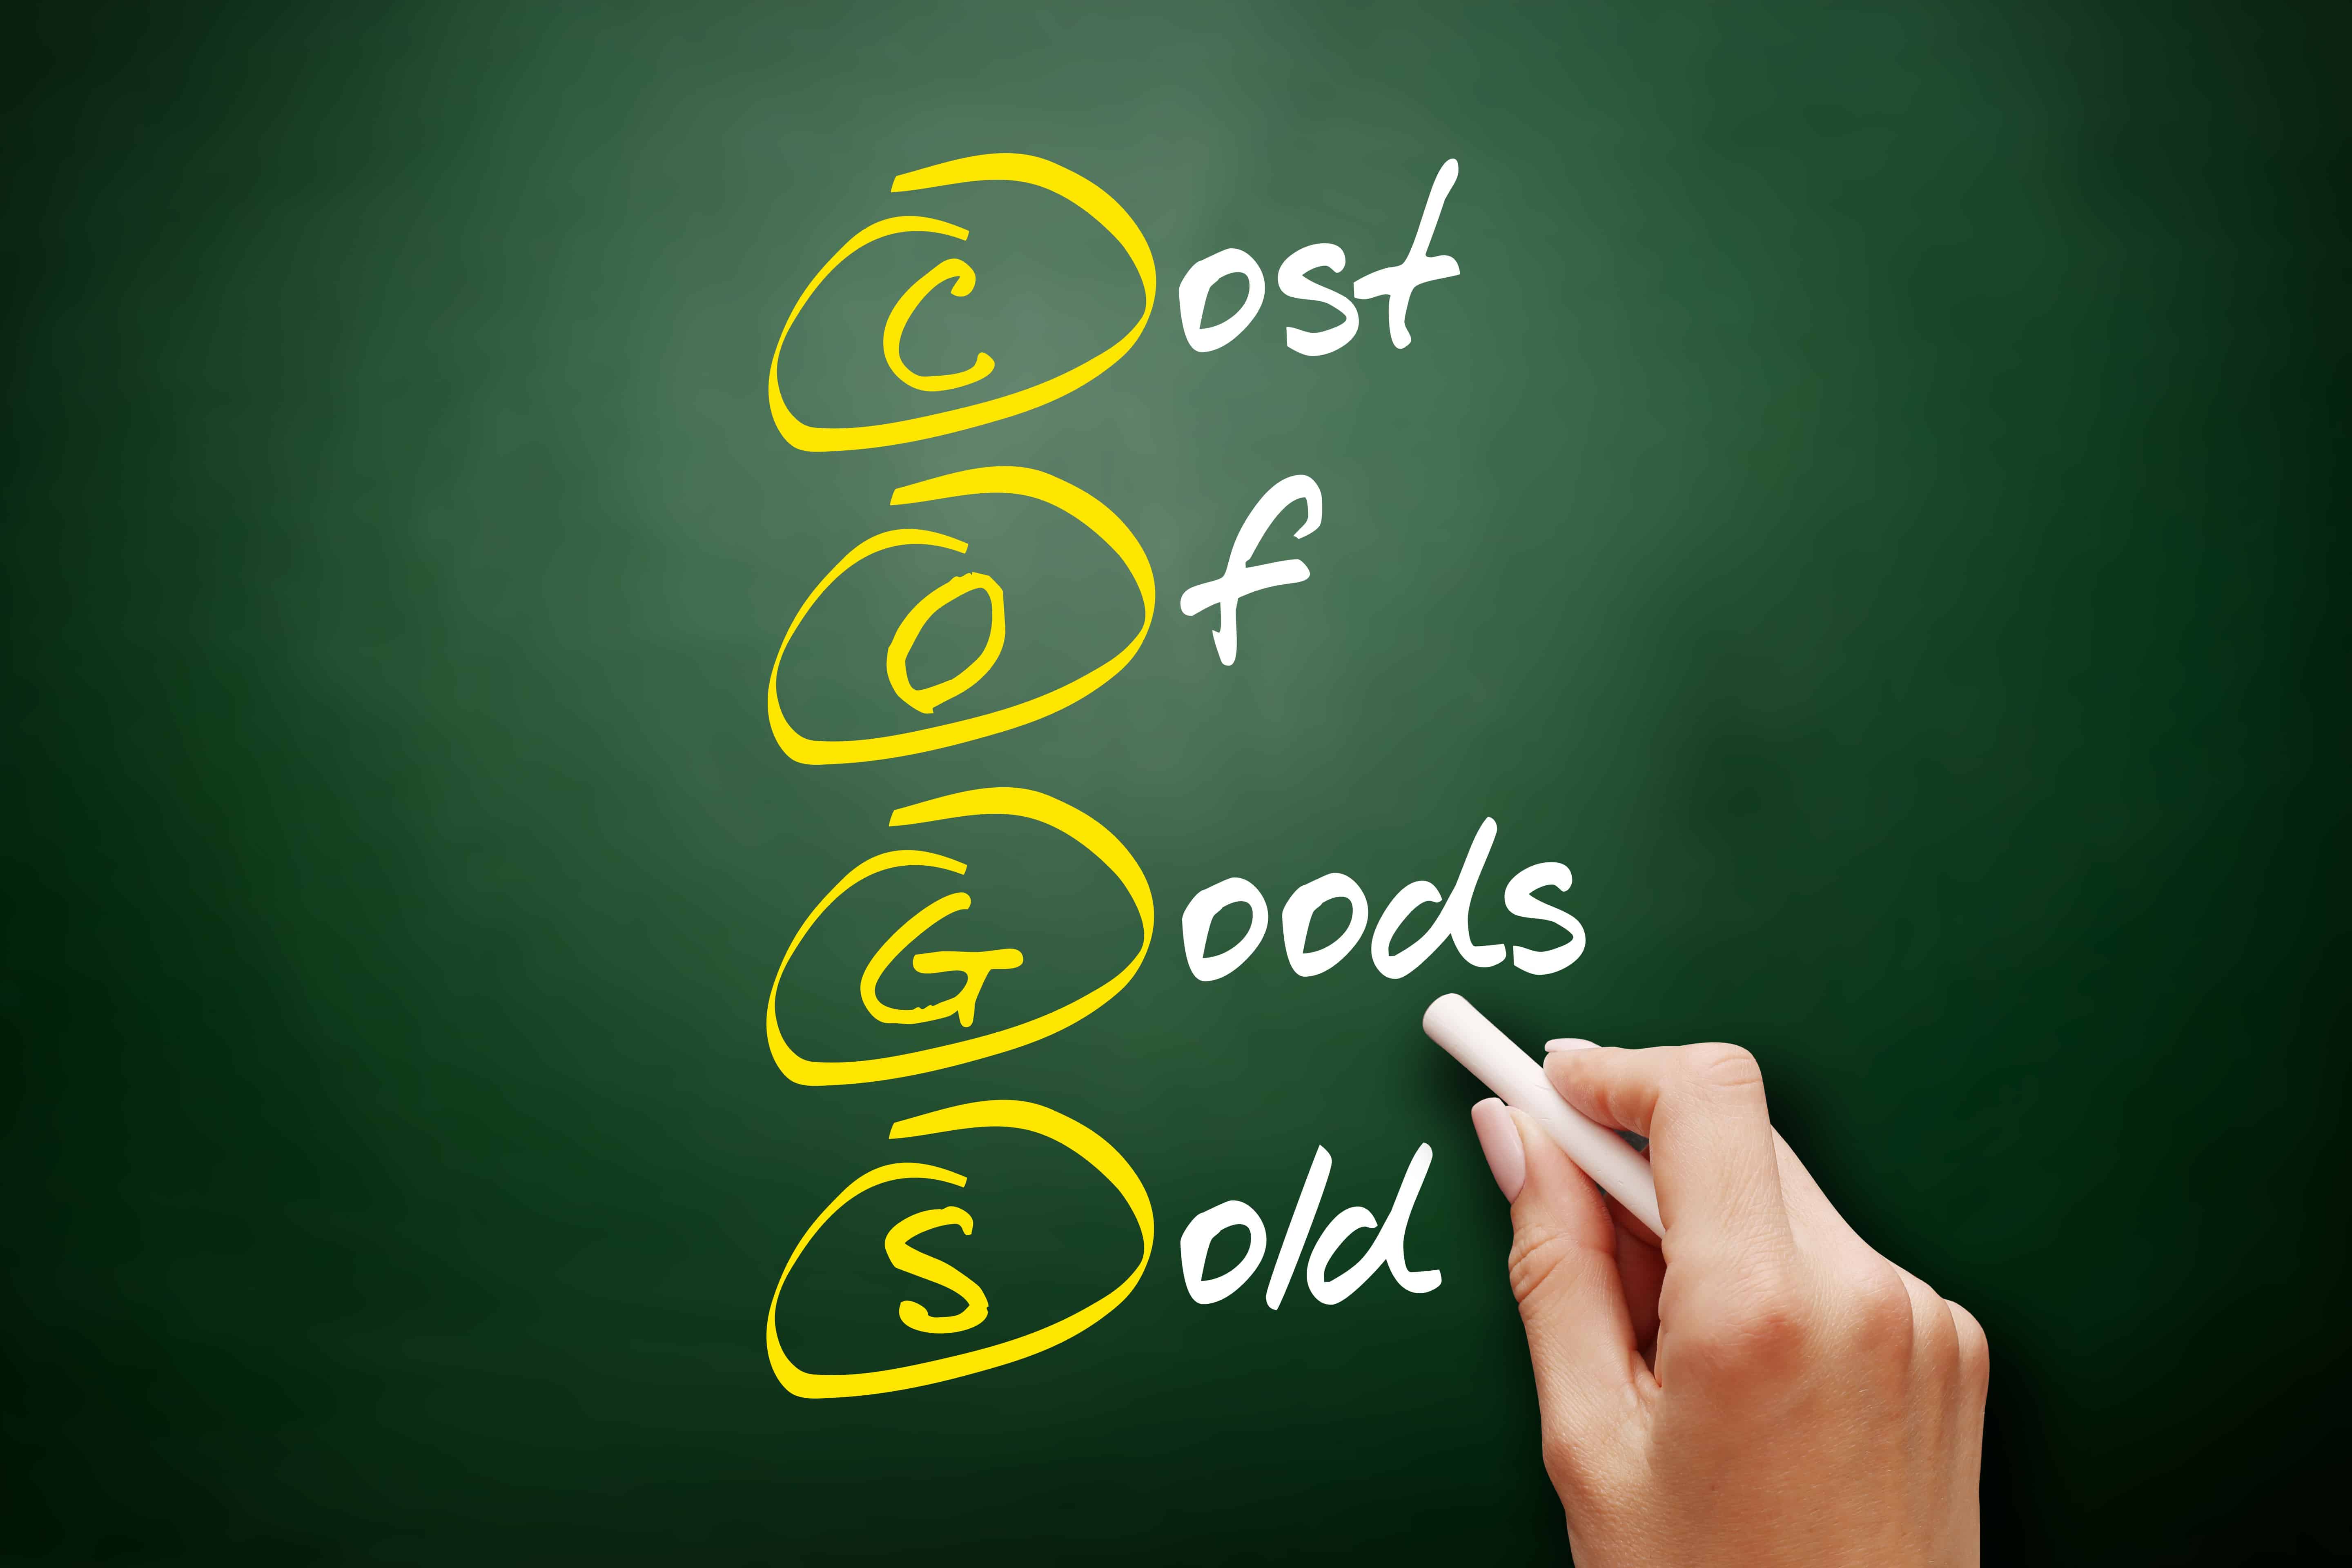 COGS - Cost of Goods Sold acronym, business concept on blackboard